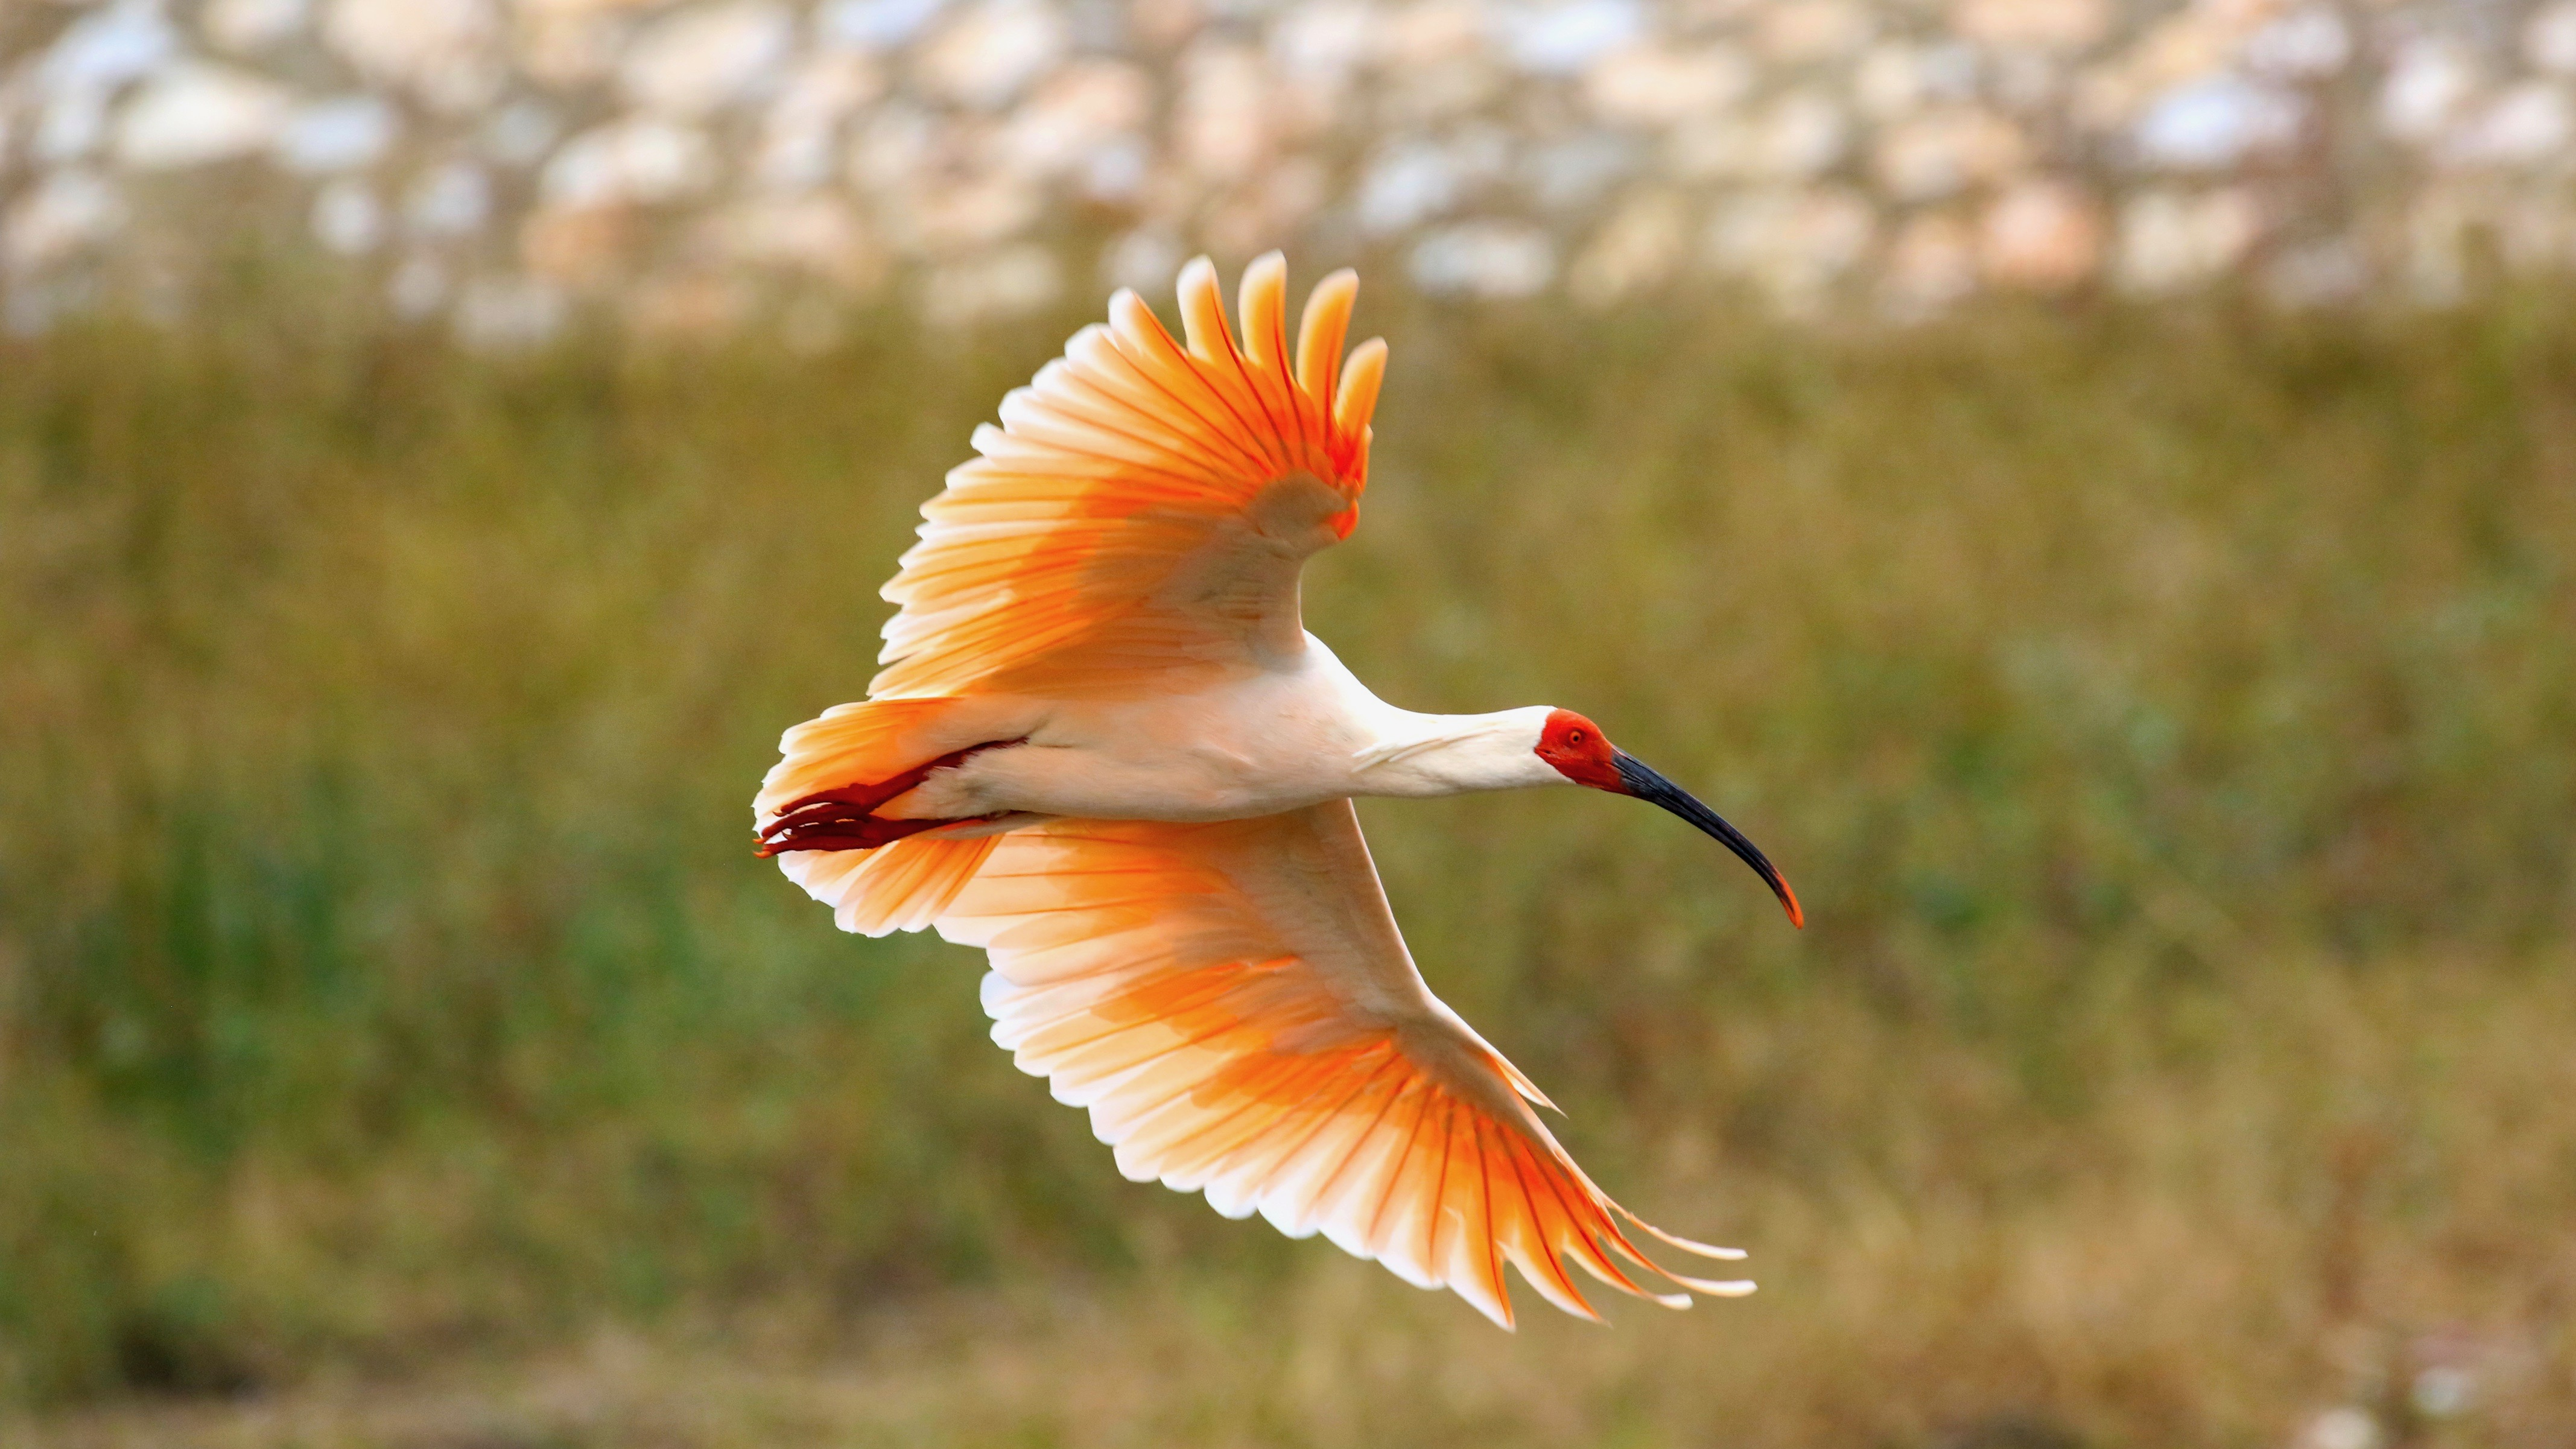 17-year-old wild crested ibis expected to break breeding age record - CGTN